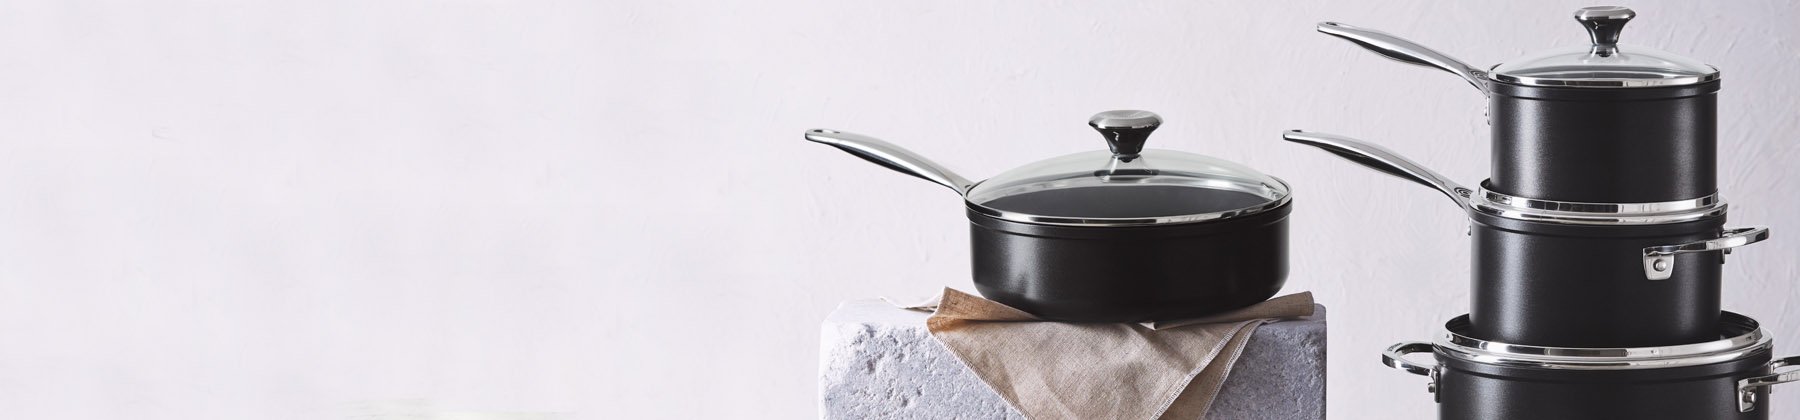 Photo of Le Creuset nonstick cookware.